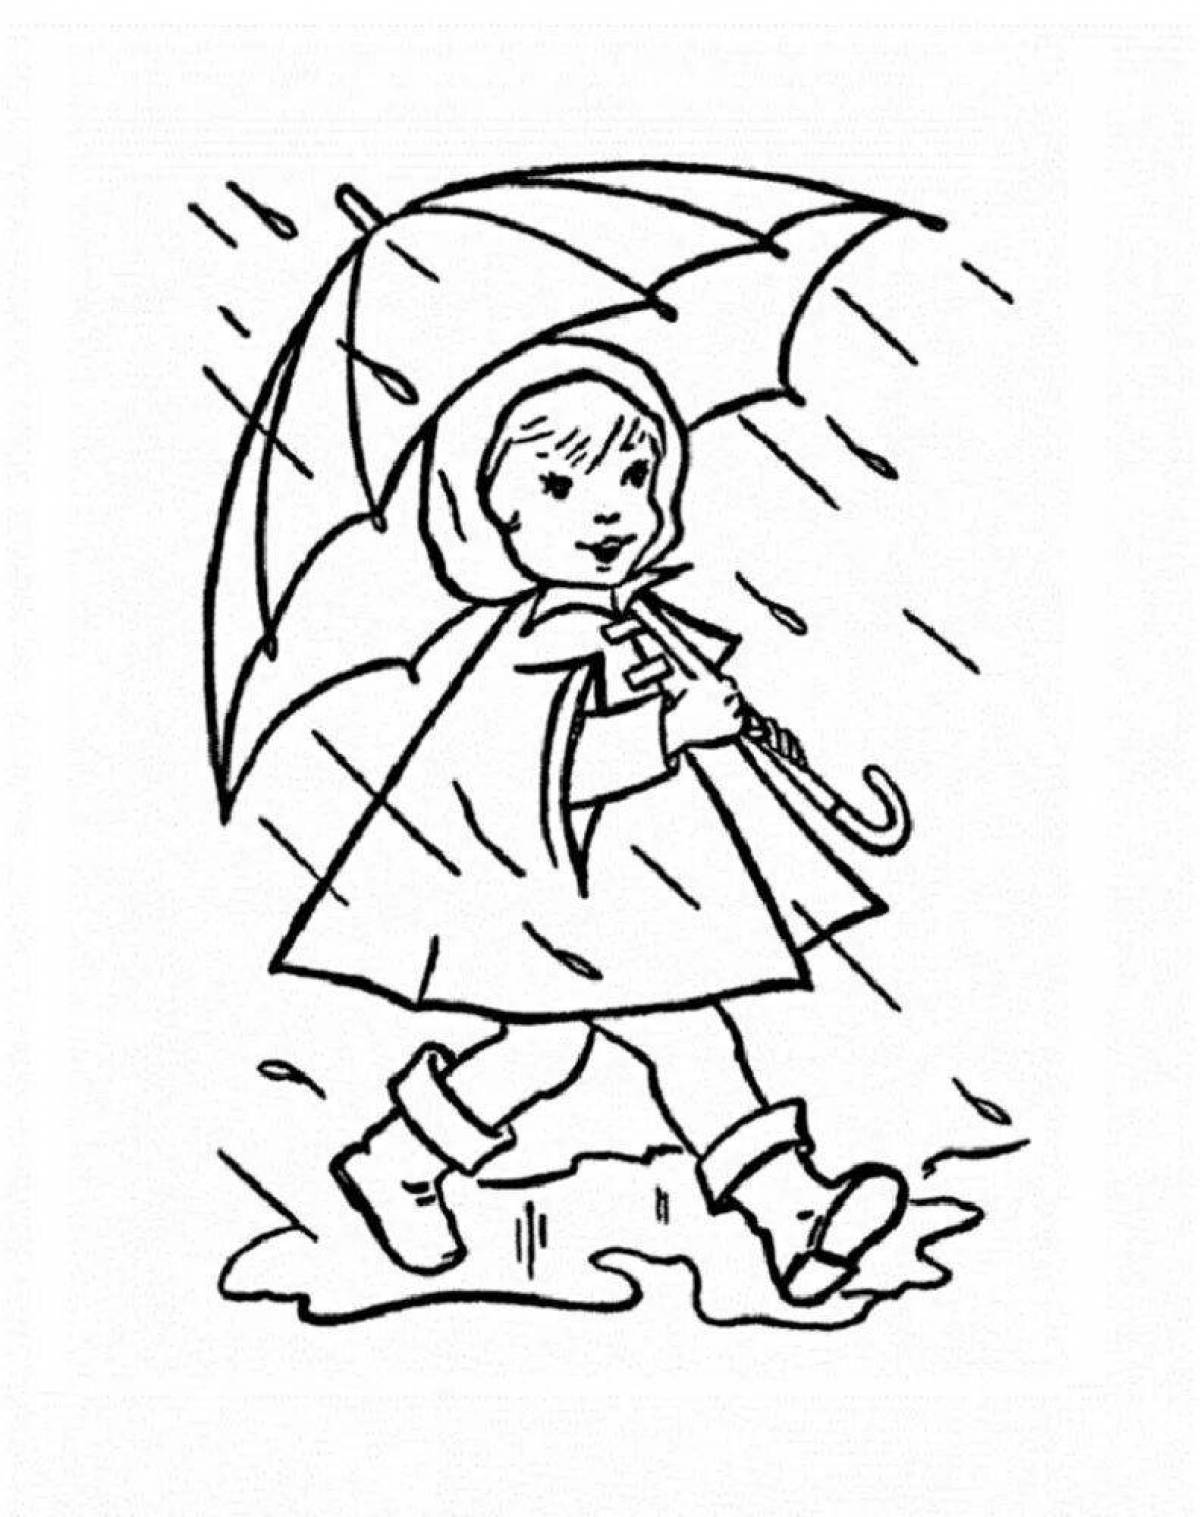 Calming spring rain coloring page